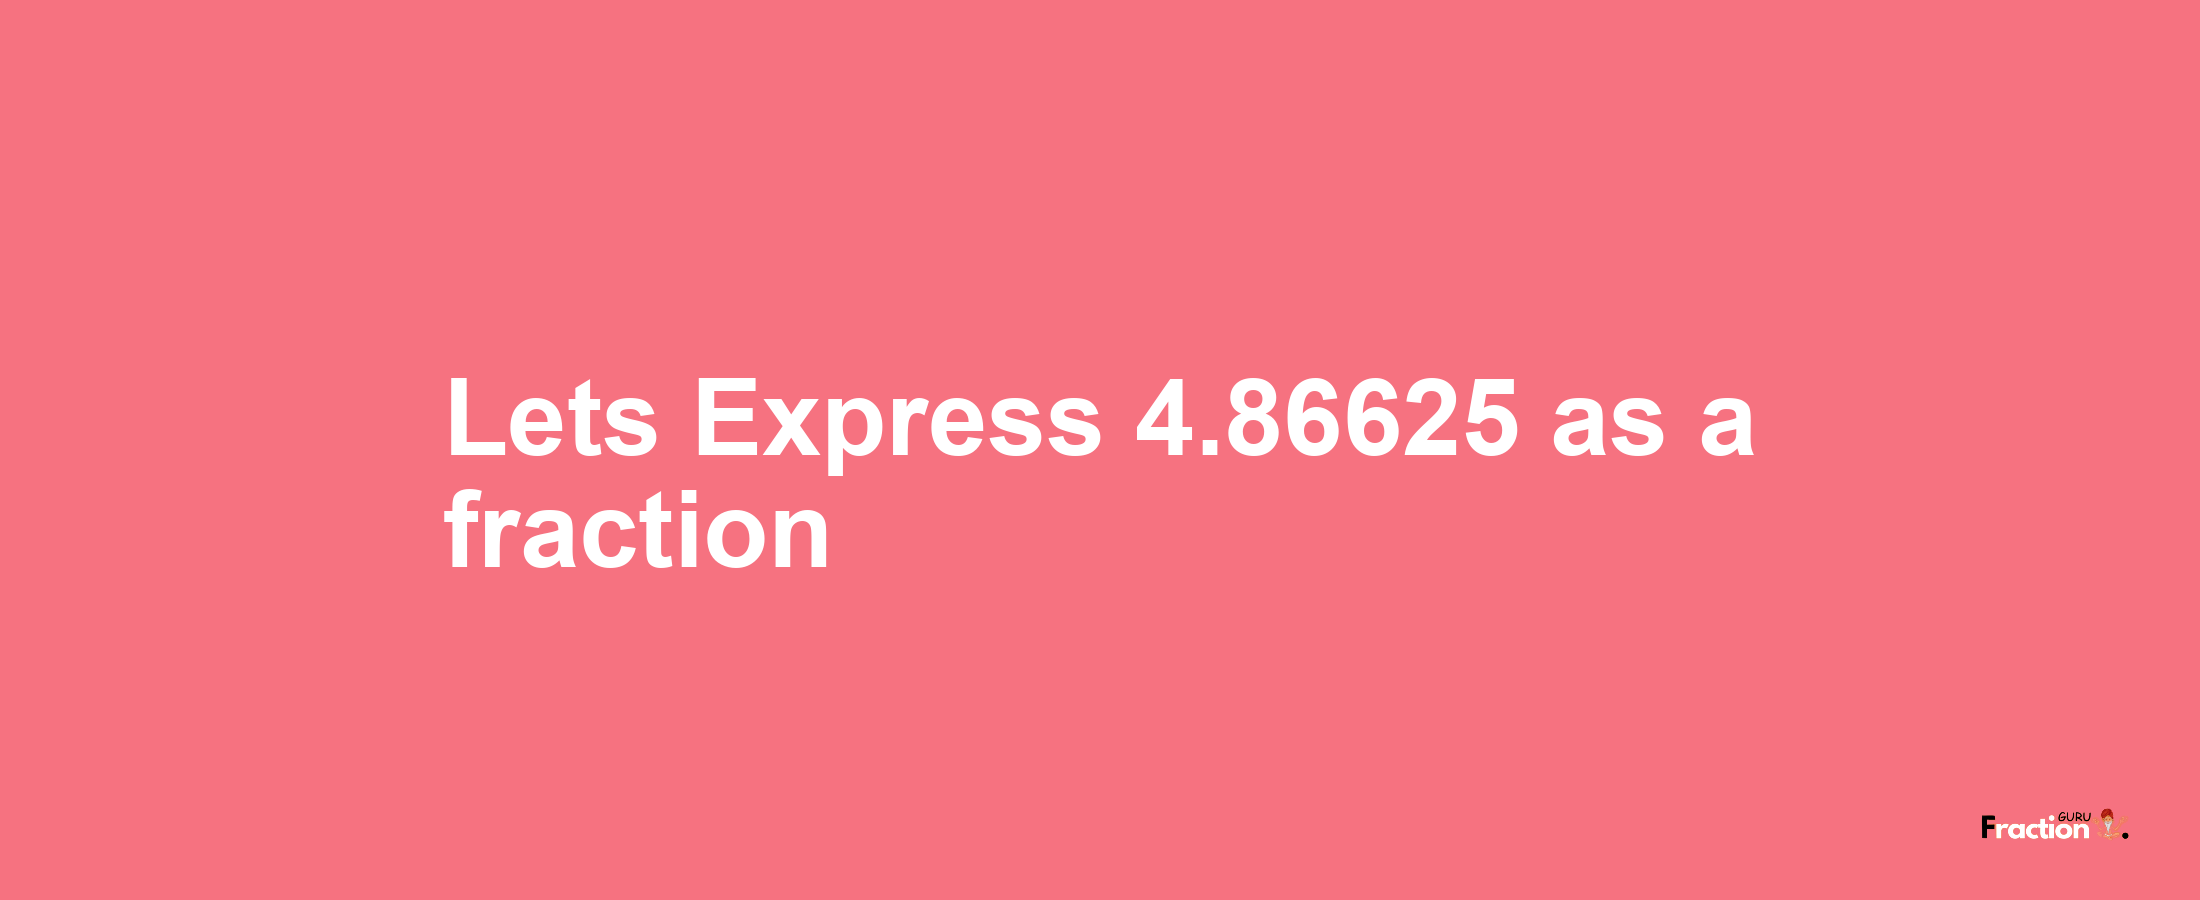 Lets Express 4.86625 as afraction